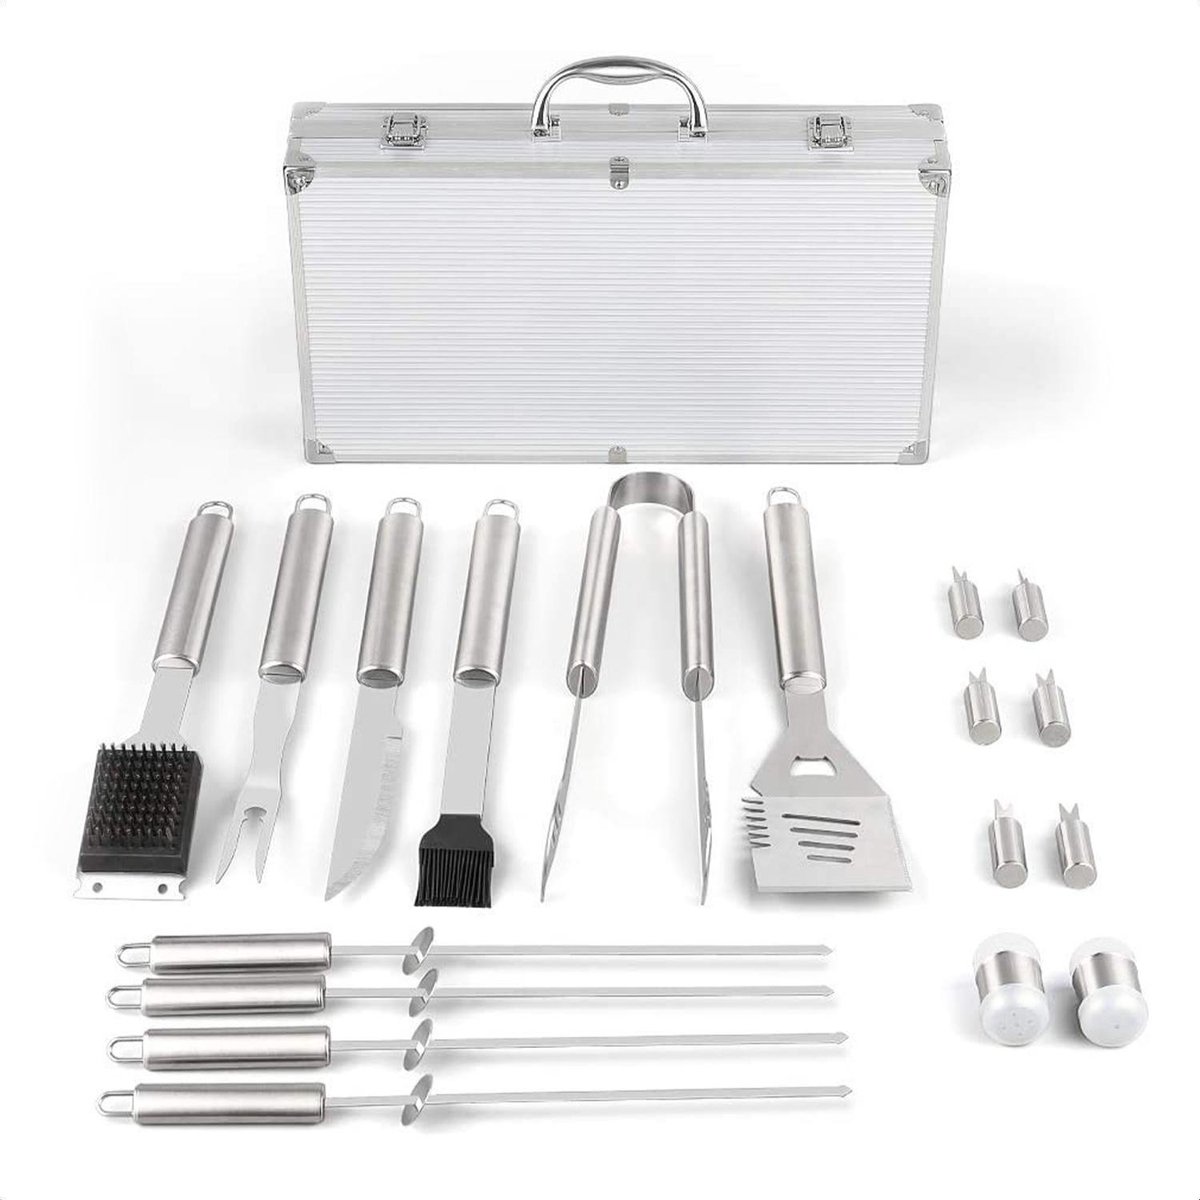 BBQ Set - 18-delige Barbecue Toolbox Accessoires - Luxe Barbecuegereedschapset + Koffer - Buxibo